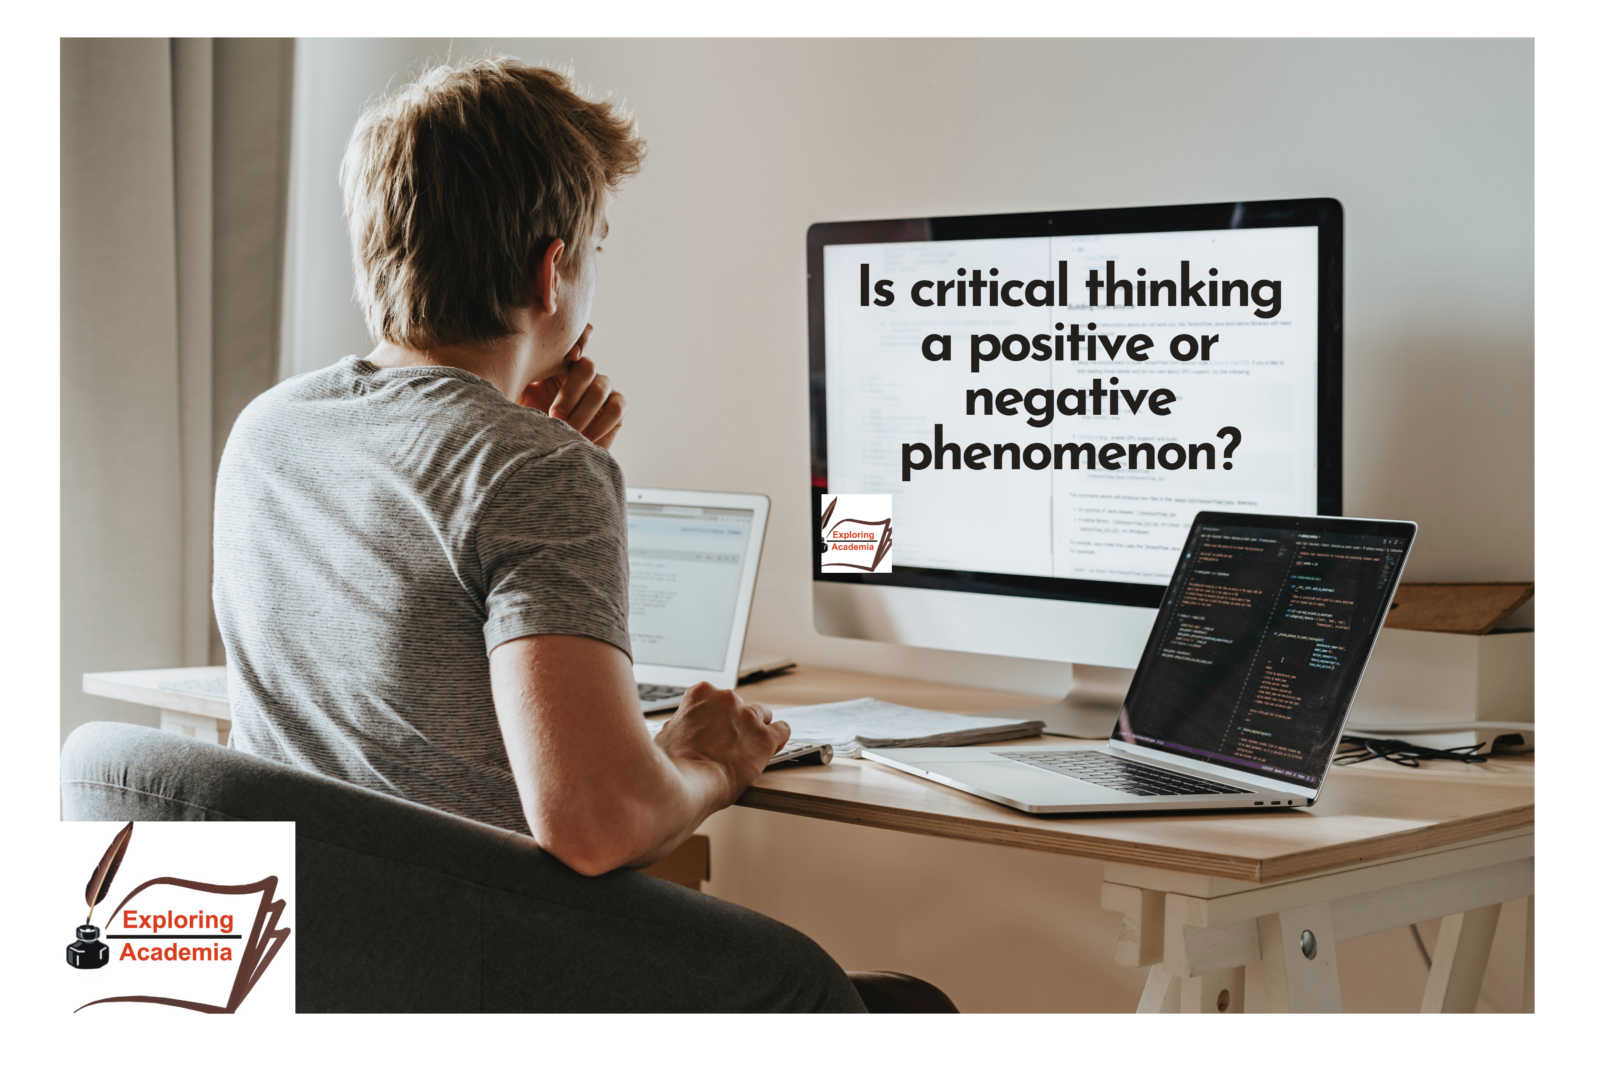 Is critical thinking a positive or negative phenomenon?